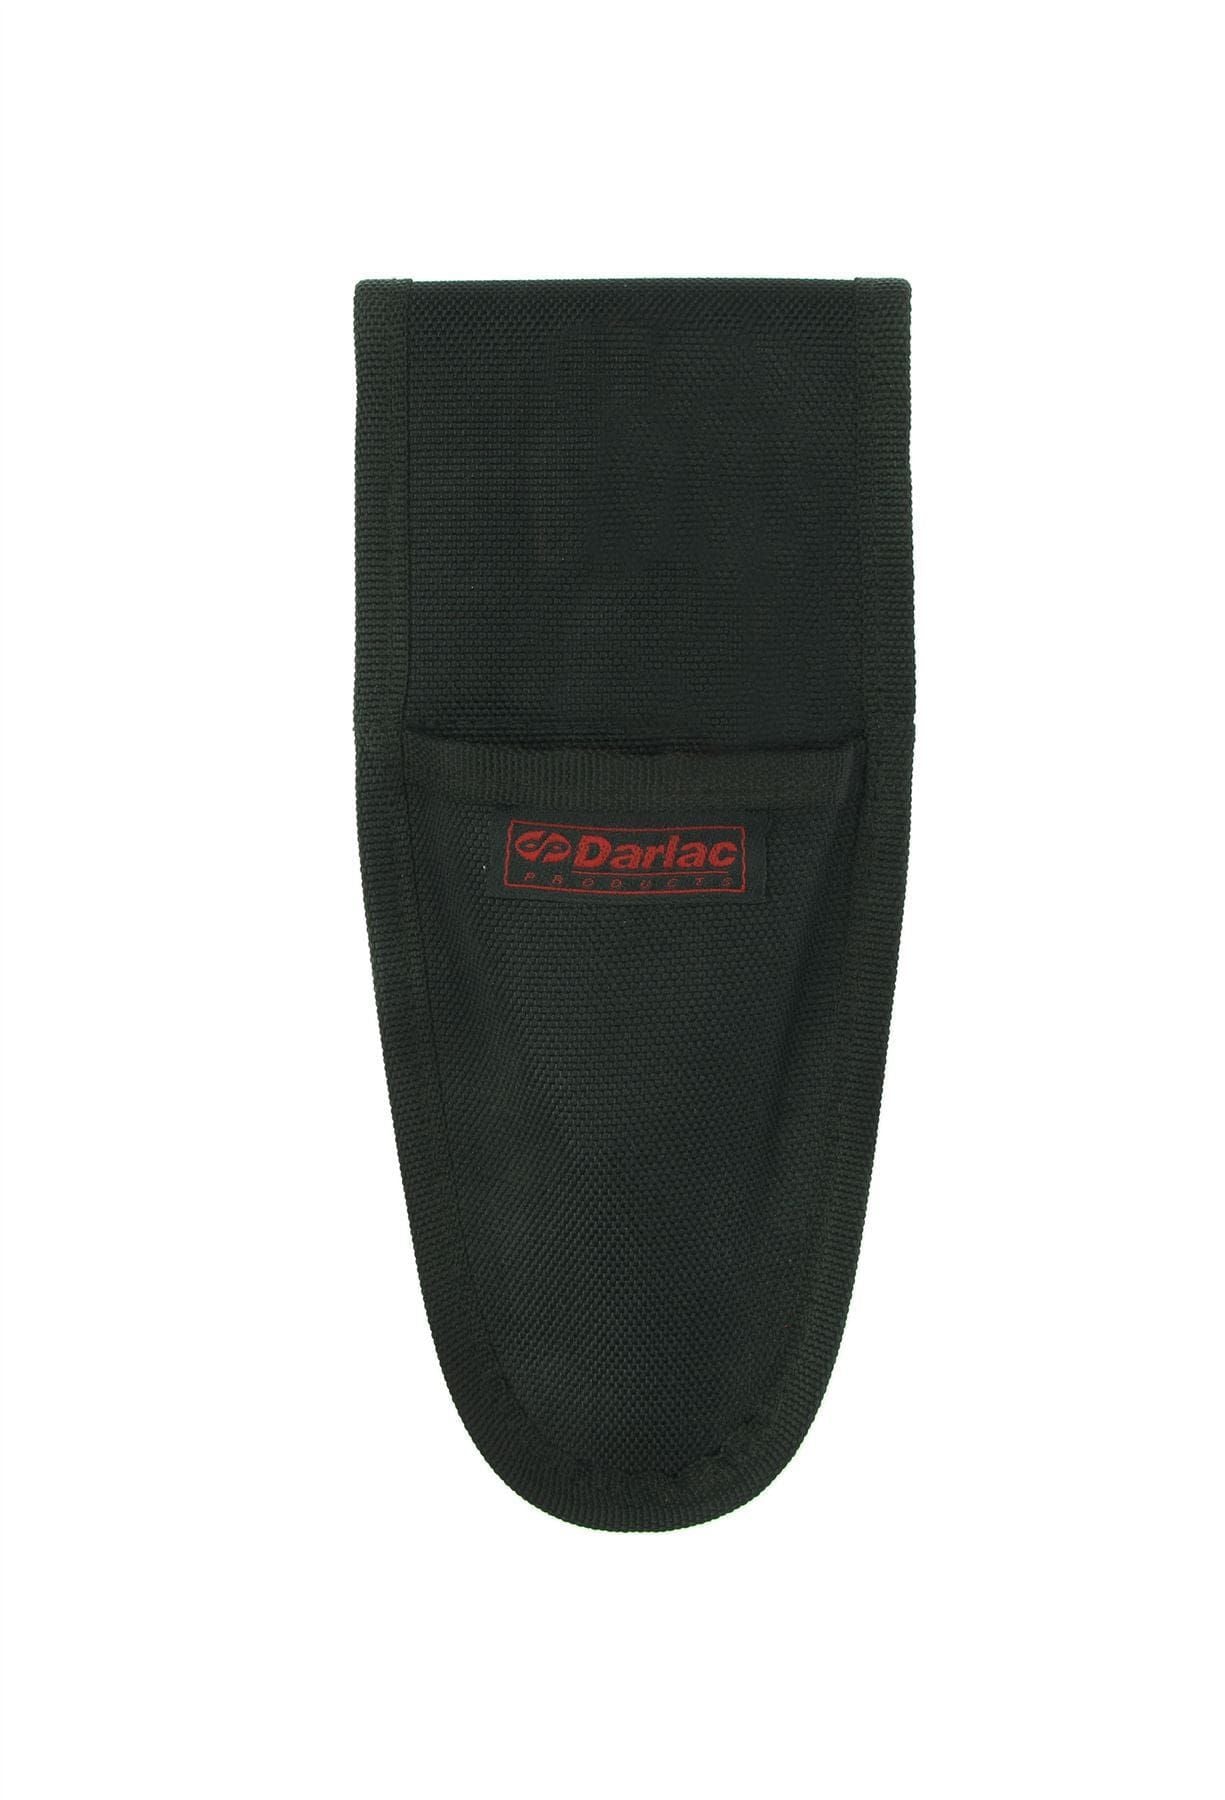 Darlac DP141 Pruner Tool Holster / Mobile Phone Holder / Secateurs UK SHIPPING ONLY